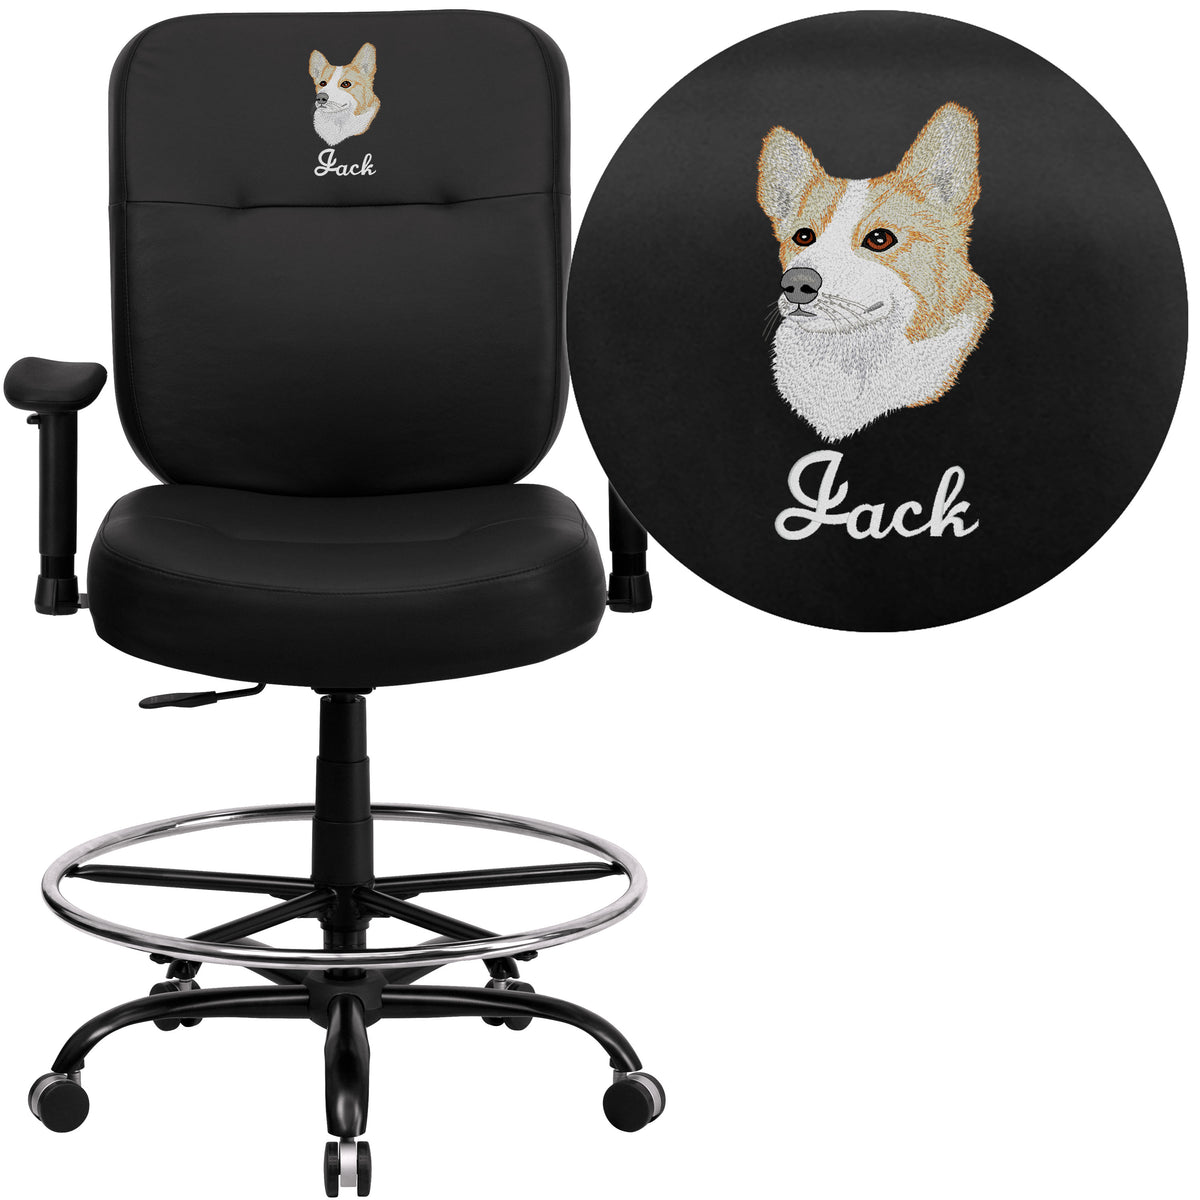 Black LeatherSoft |#| Embroidered Big & Tall 400 lb. Rated Black LeatherSoft Ergonomic Draft Chair